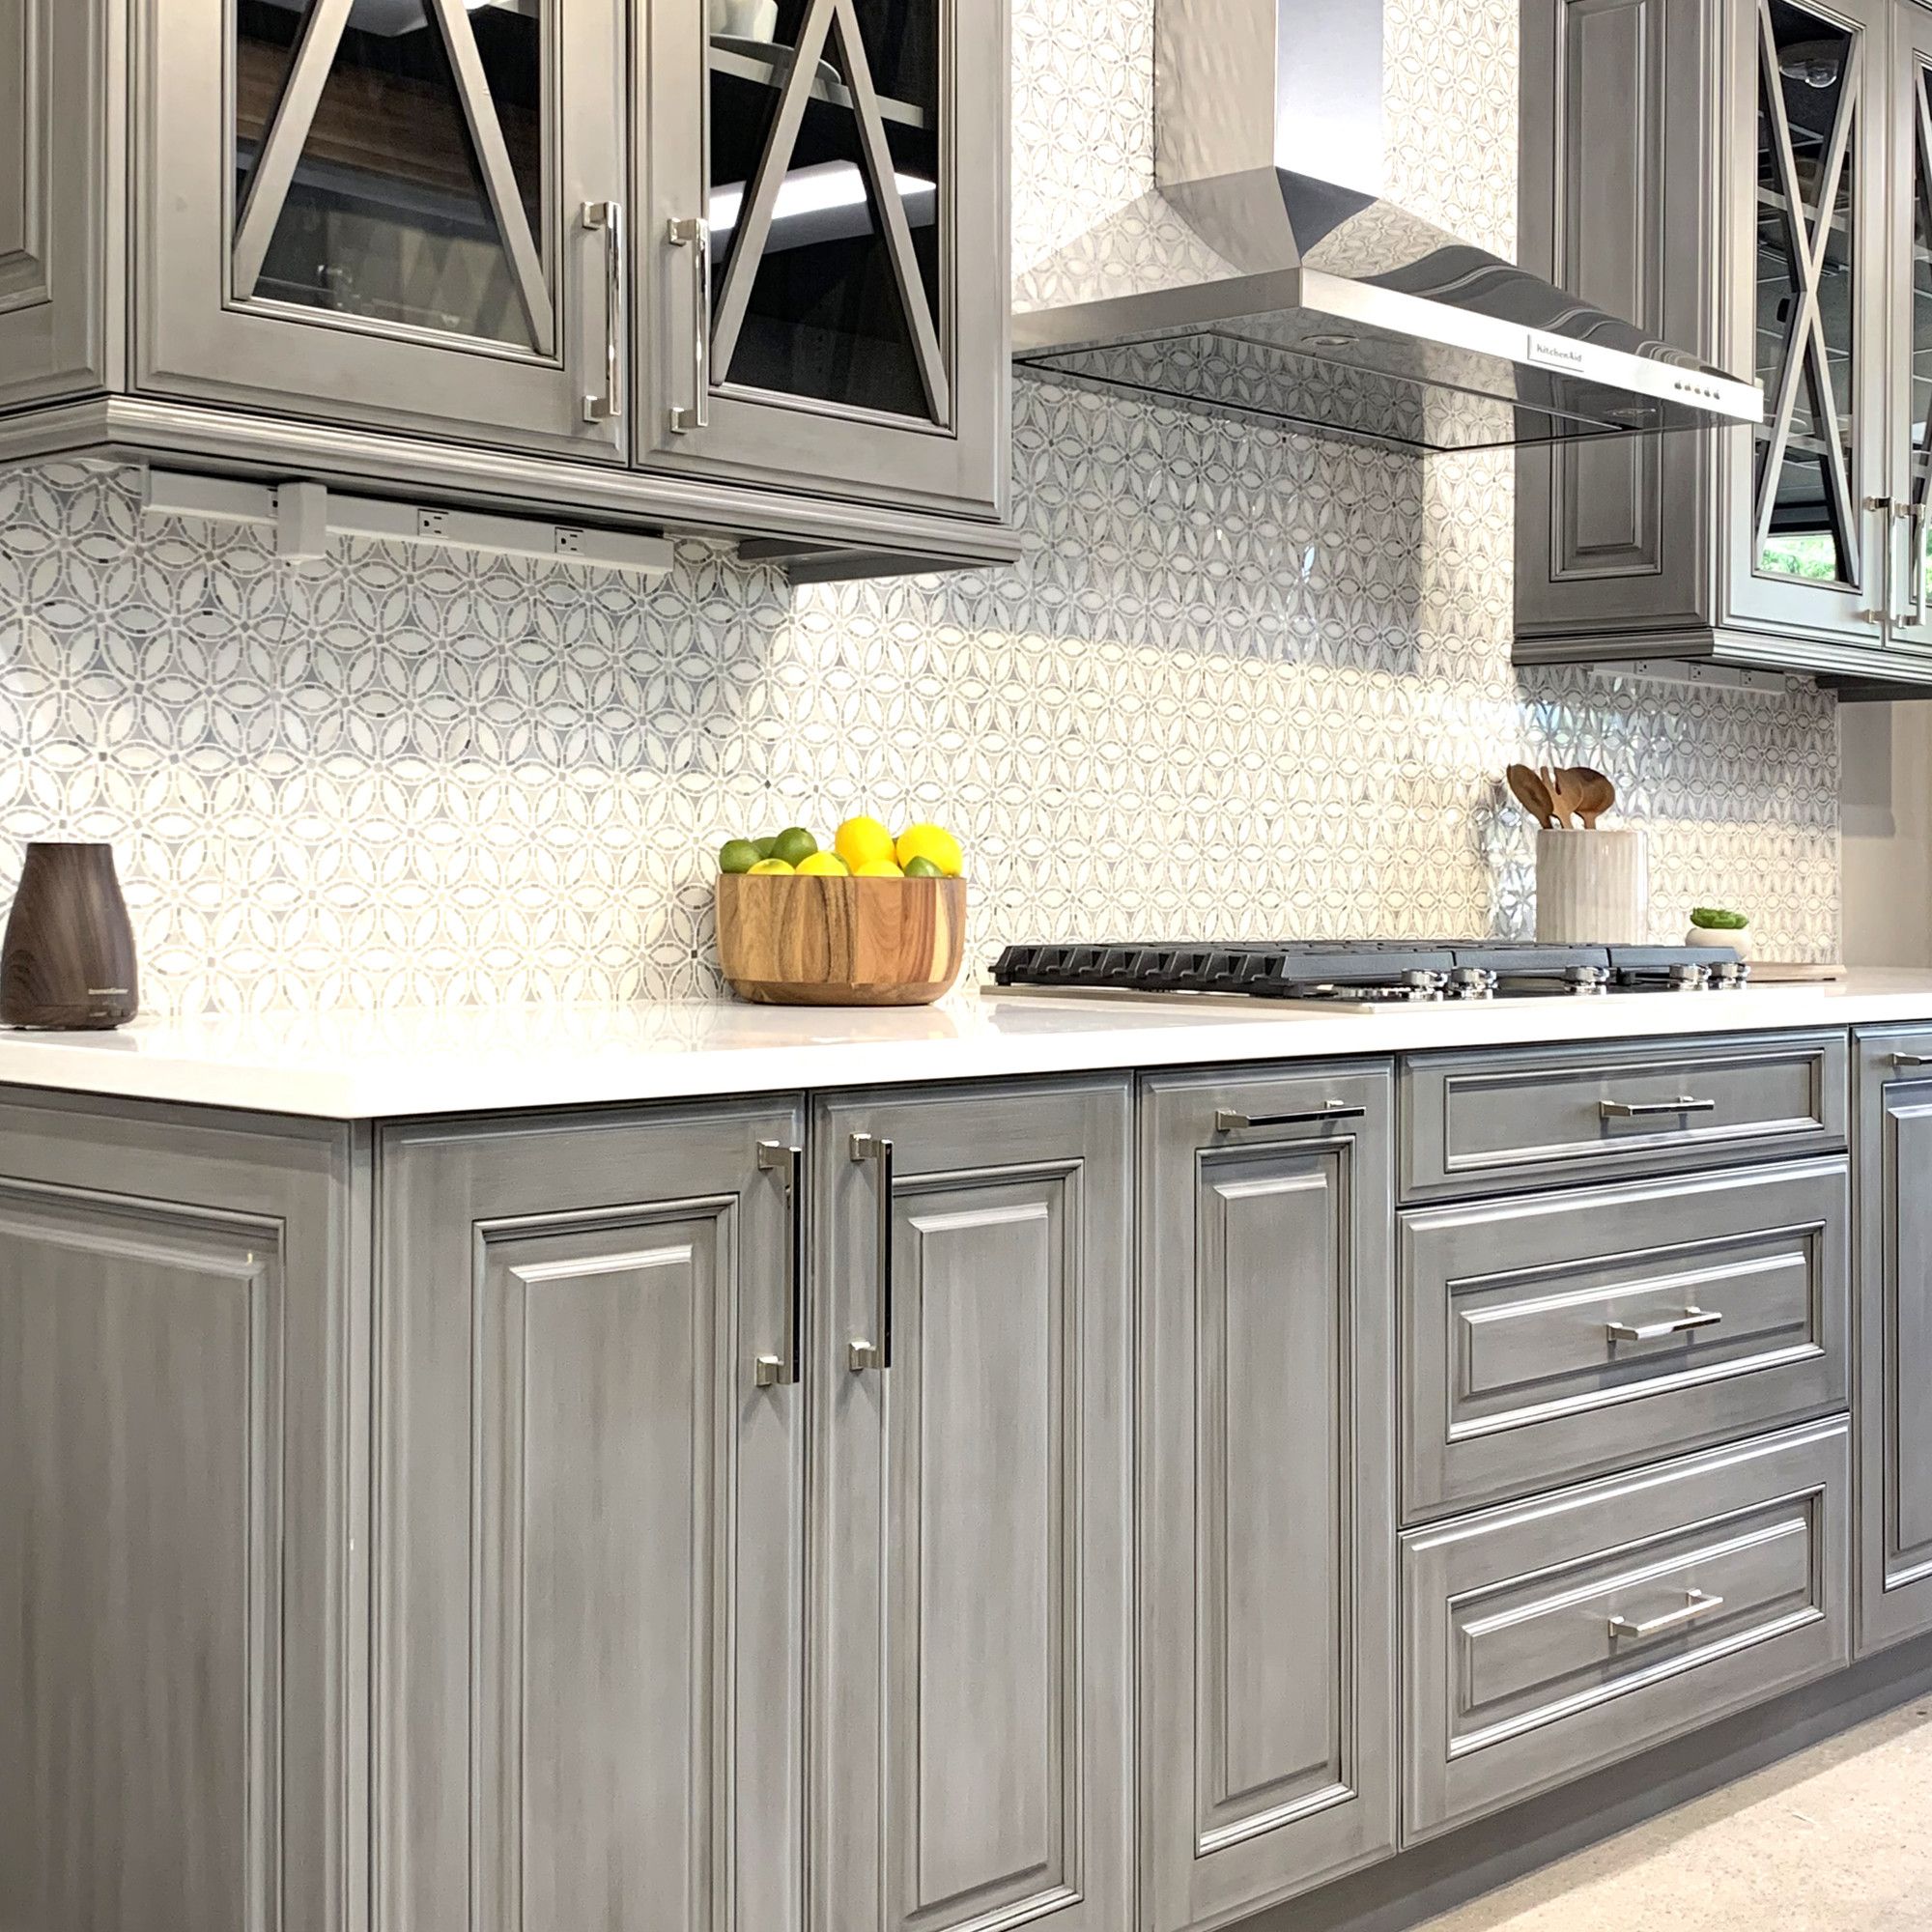 Kitchen with grey cabinets with silver handle, white countertops and a patterned backsplash. Upper cabinets have glass fronts with wood x design over glass